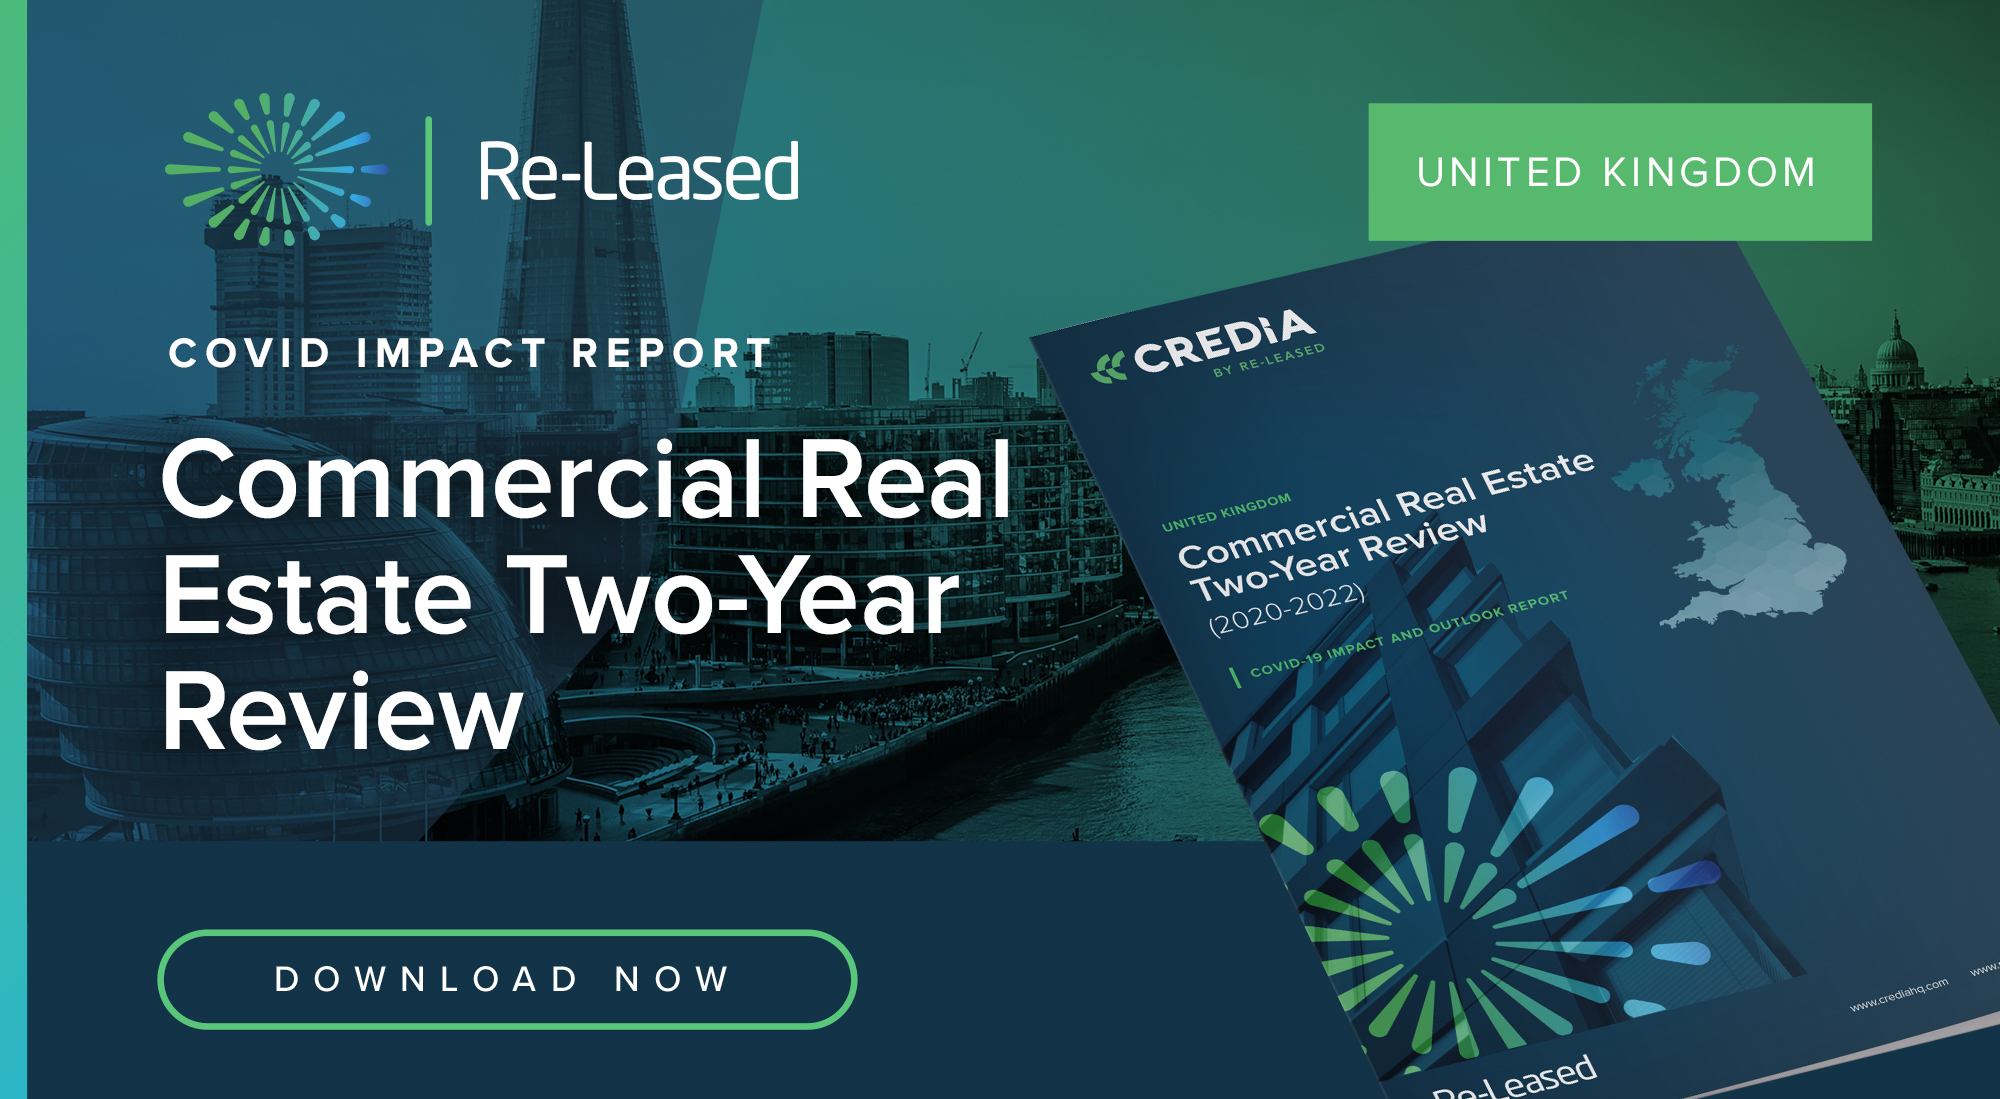 COVID Impact Report: Two-Year Review